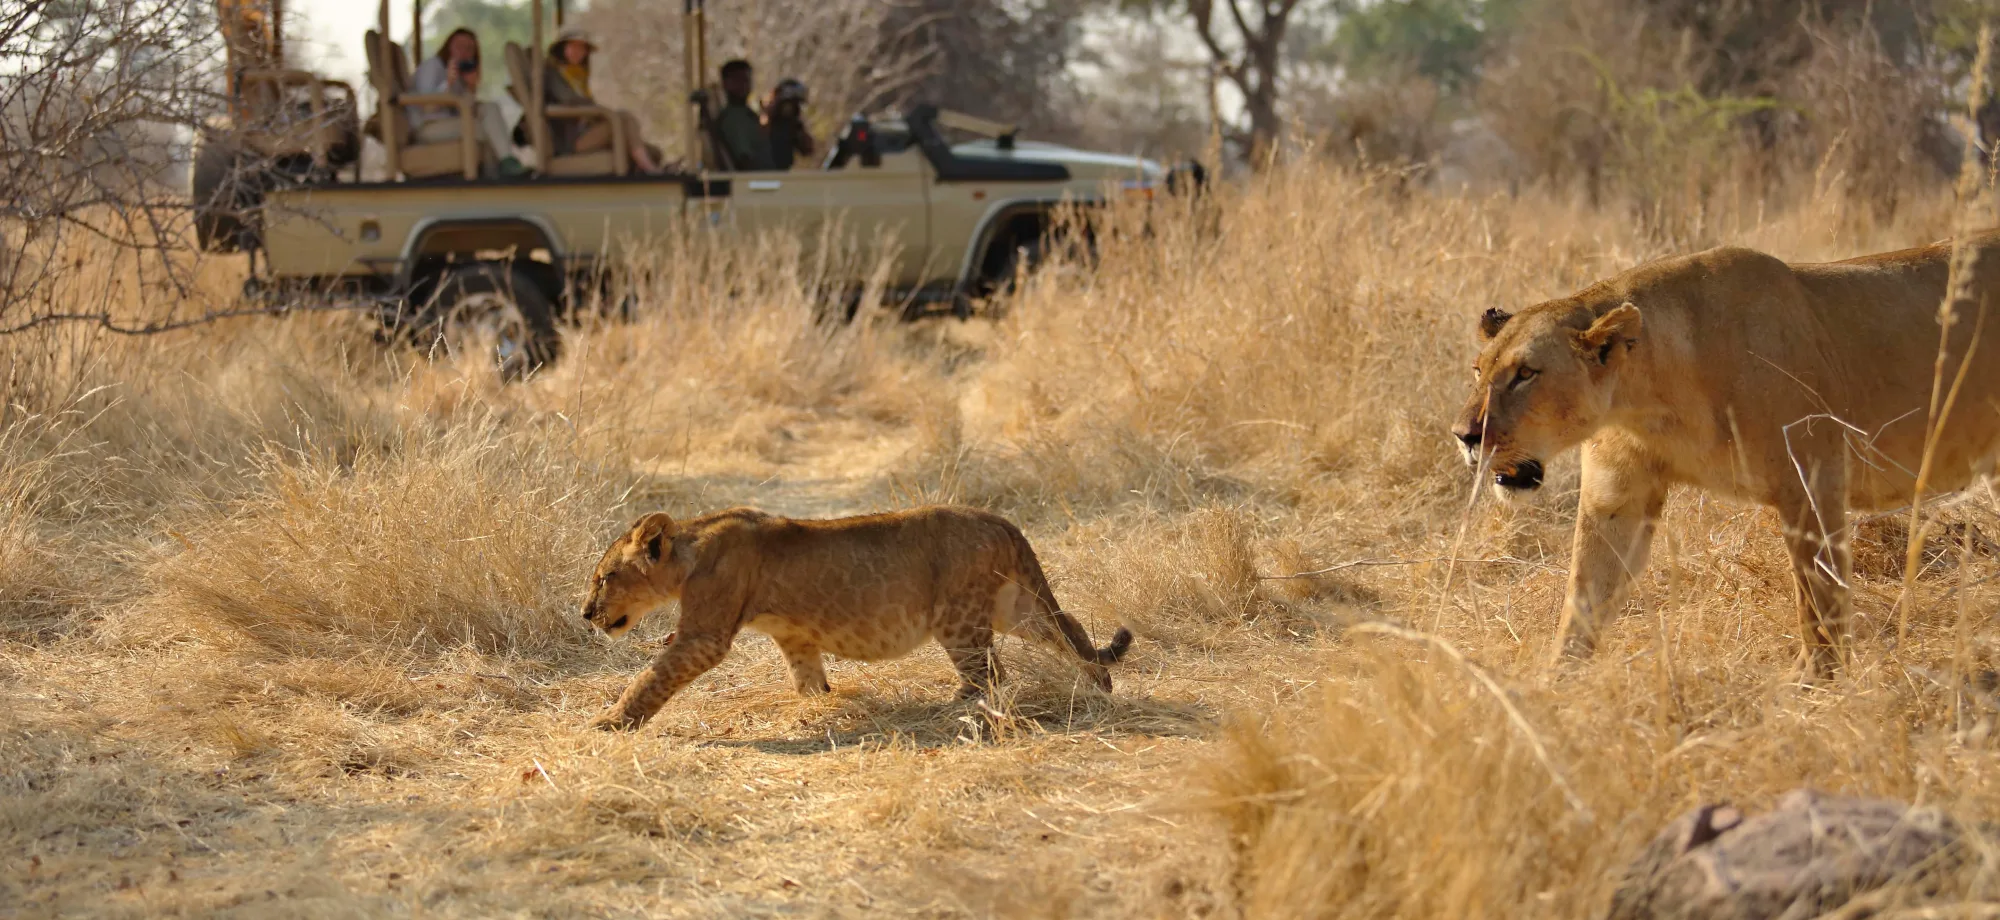 A group of people are in a 4x4 jeep in Ruaha National Park observing a lioness and her cub.